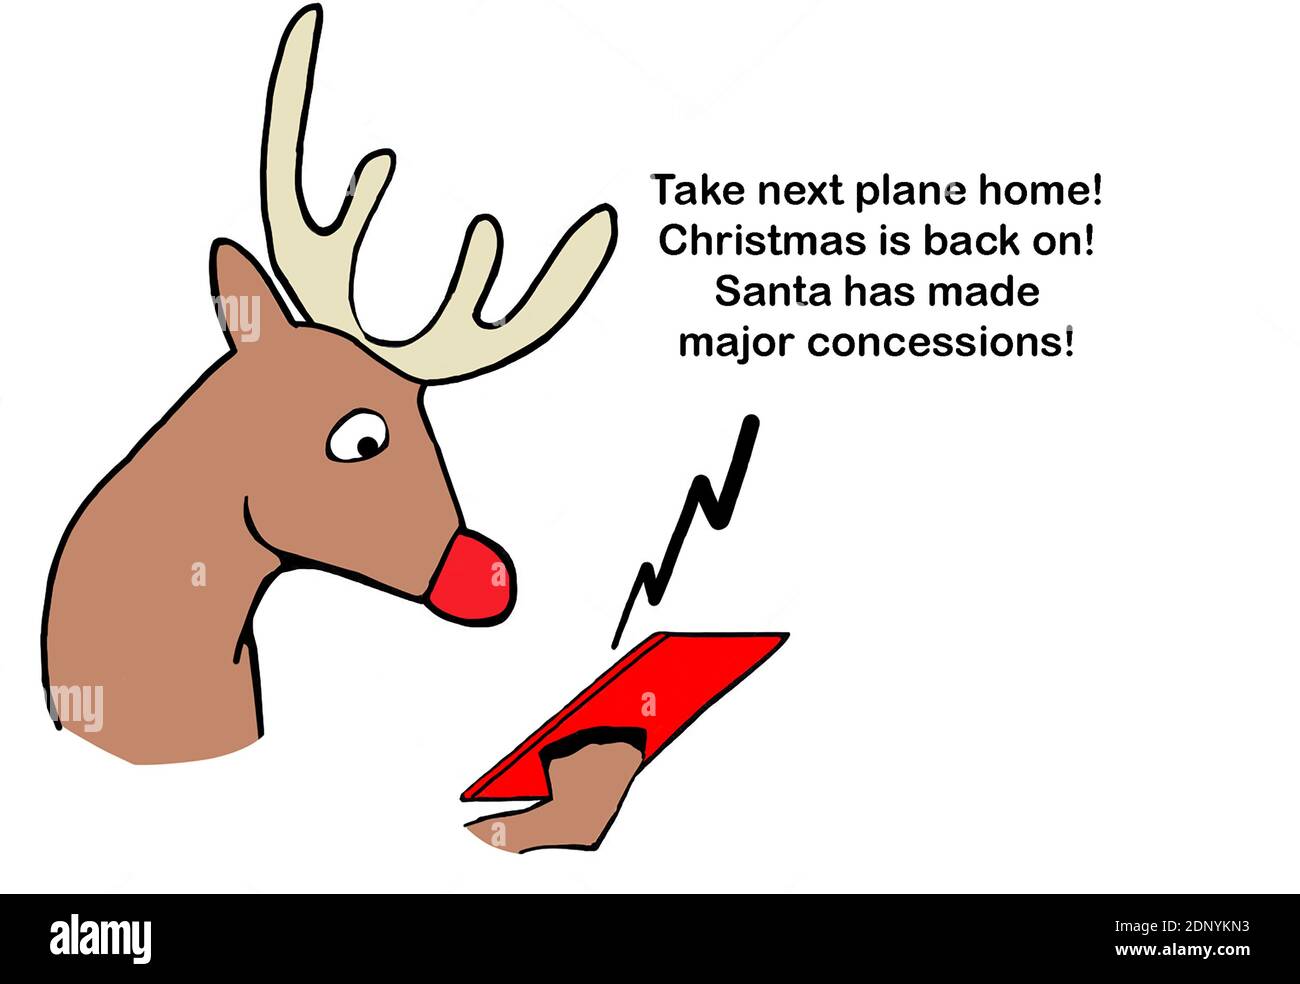 rudolph the reindeer hears from his dispatcher what Santa has made labor concessions Stock Photo